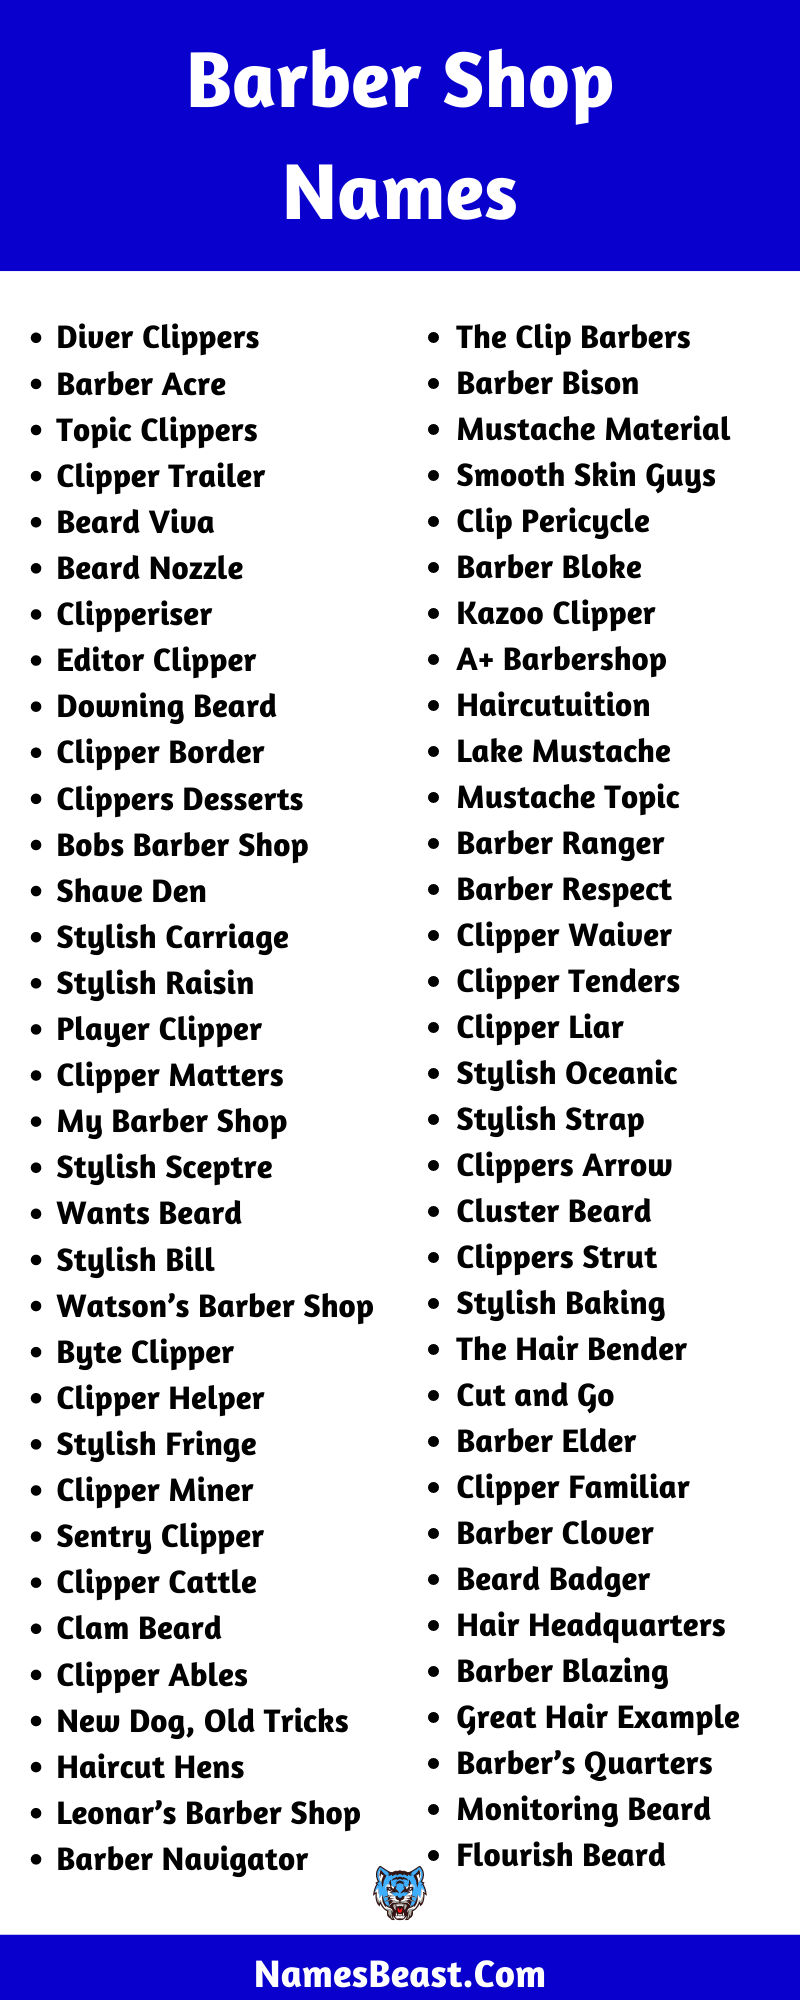 650+ Barber Shop Names Ideas and Suggestions